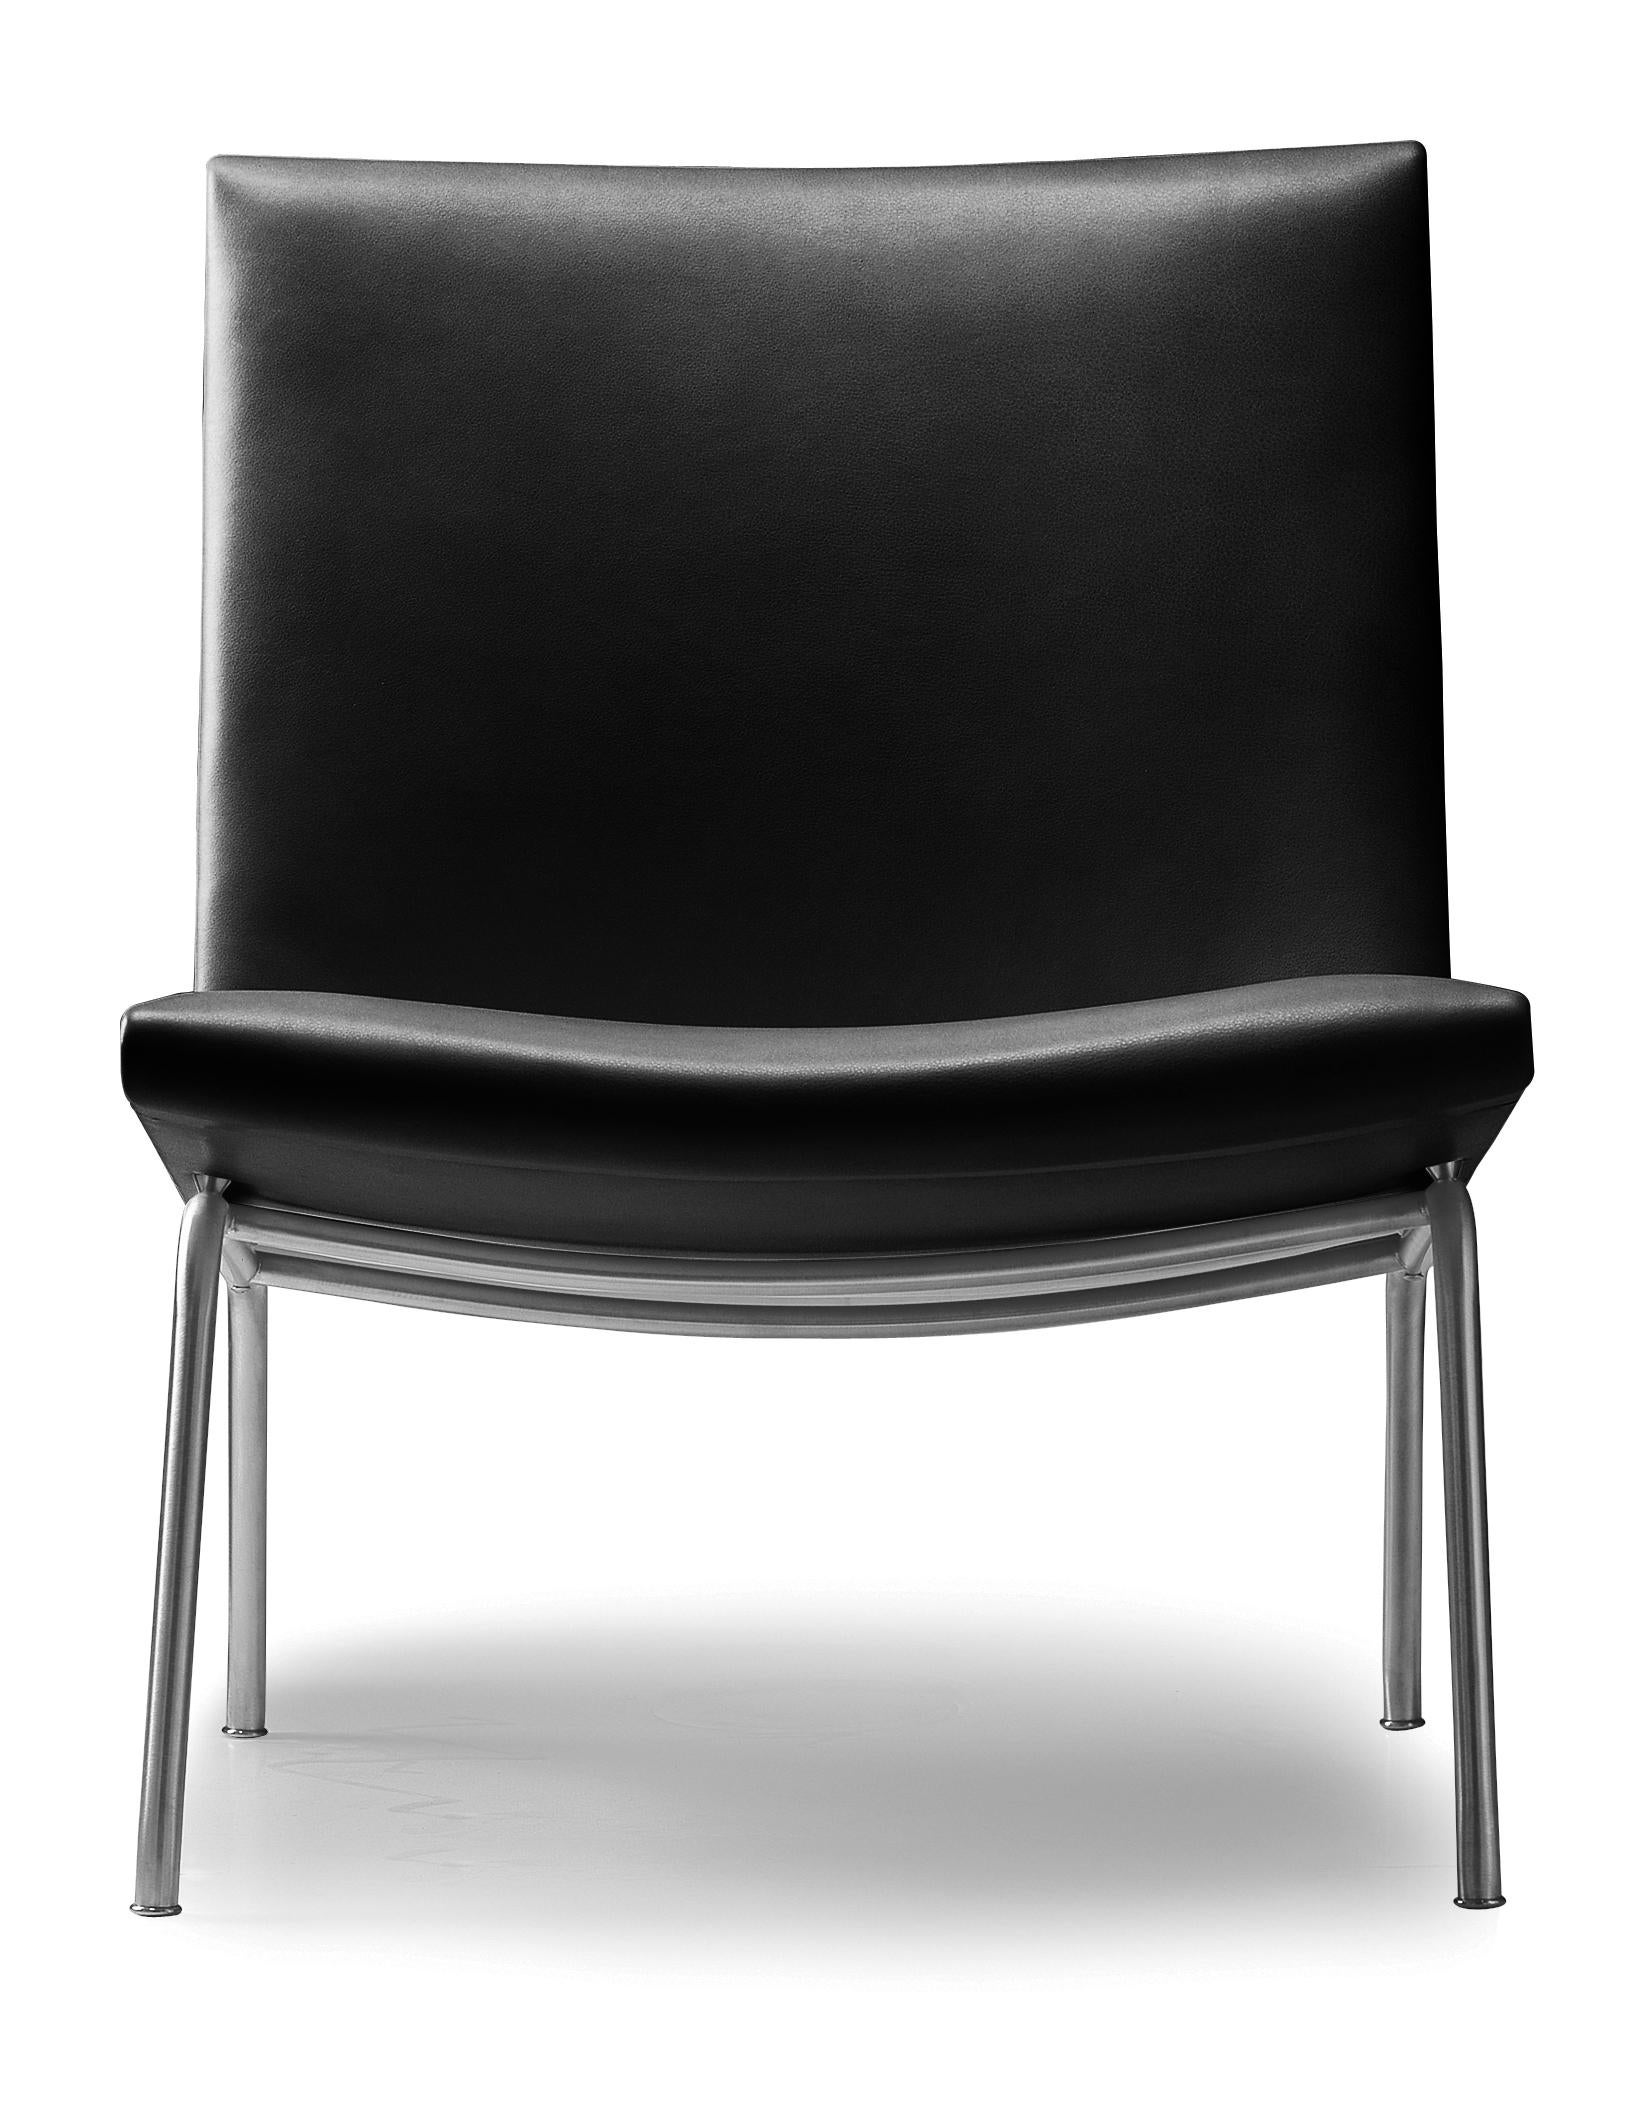 Black (Thor 301) CH401 Kastrup Chair in Stainless Steel with Leather Seat by Hans J. Wegner 2